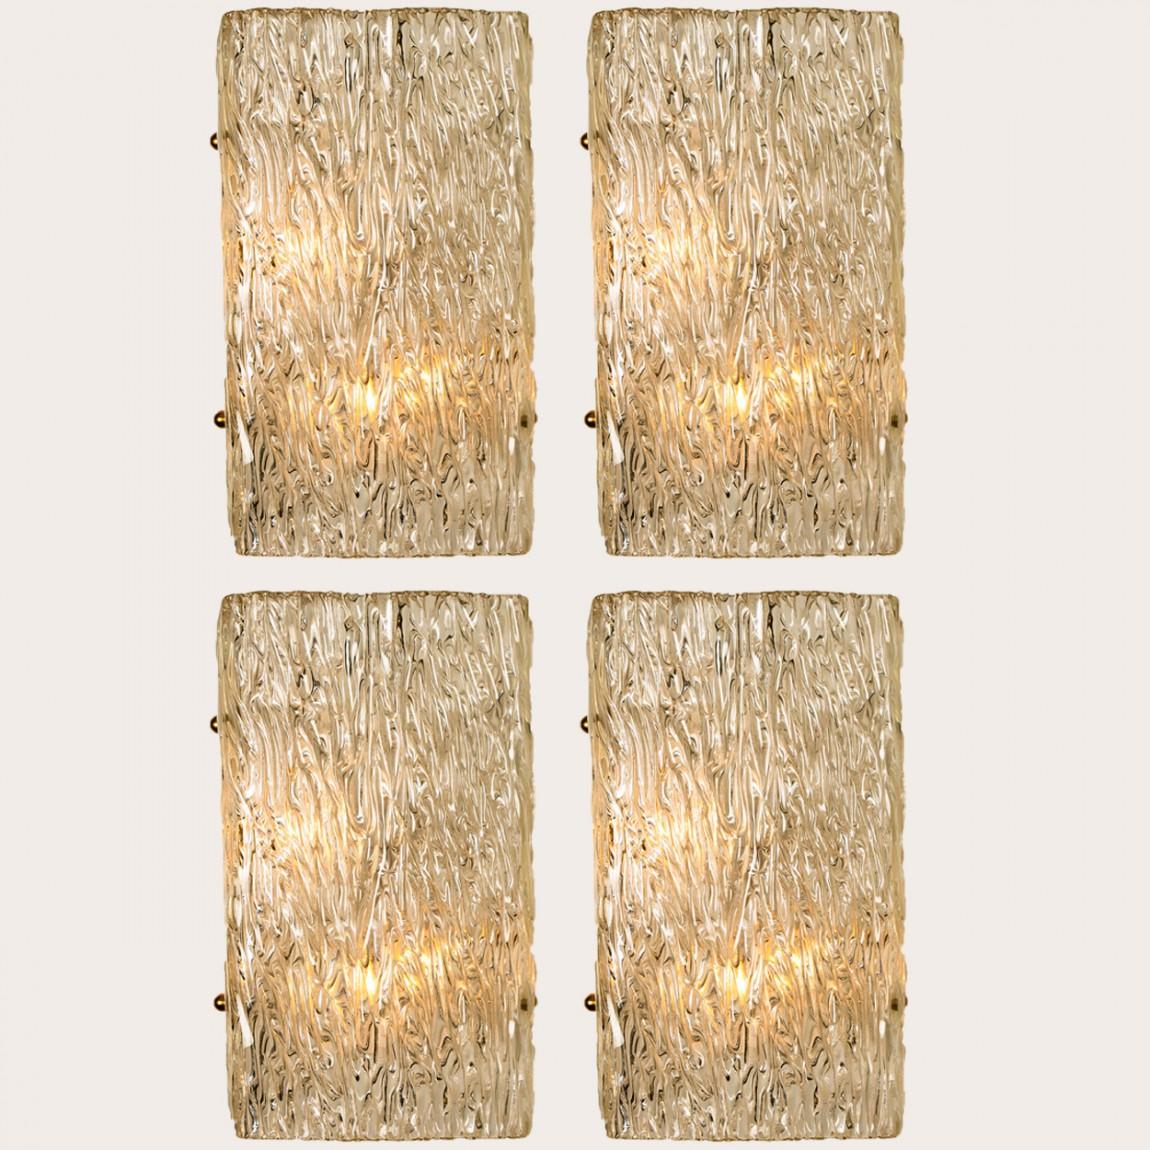 Wave glass rectangular fixtures by J.T. Kalmar, Vienna, Austria, manufactured in circa 1960. The glass shows a beautiful wave texture, which gives a diffuse light effect and a nice pattern on ceiling, walls and floor.
The stylish elegance of this